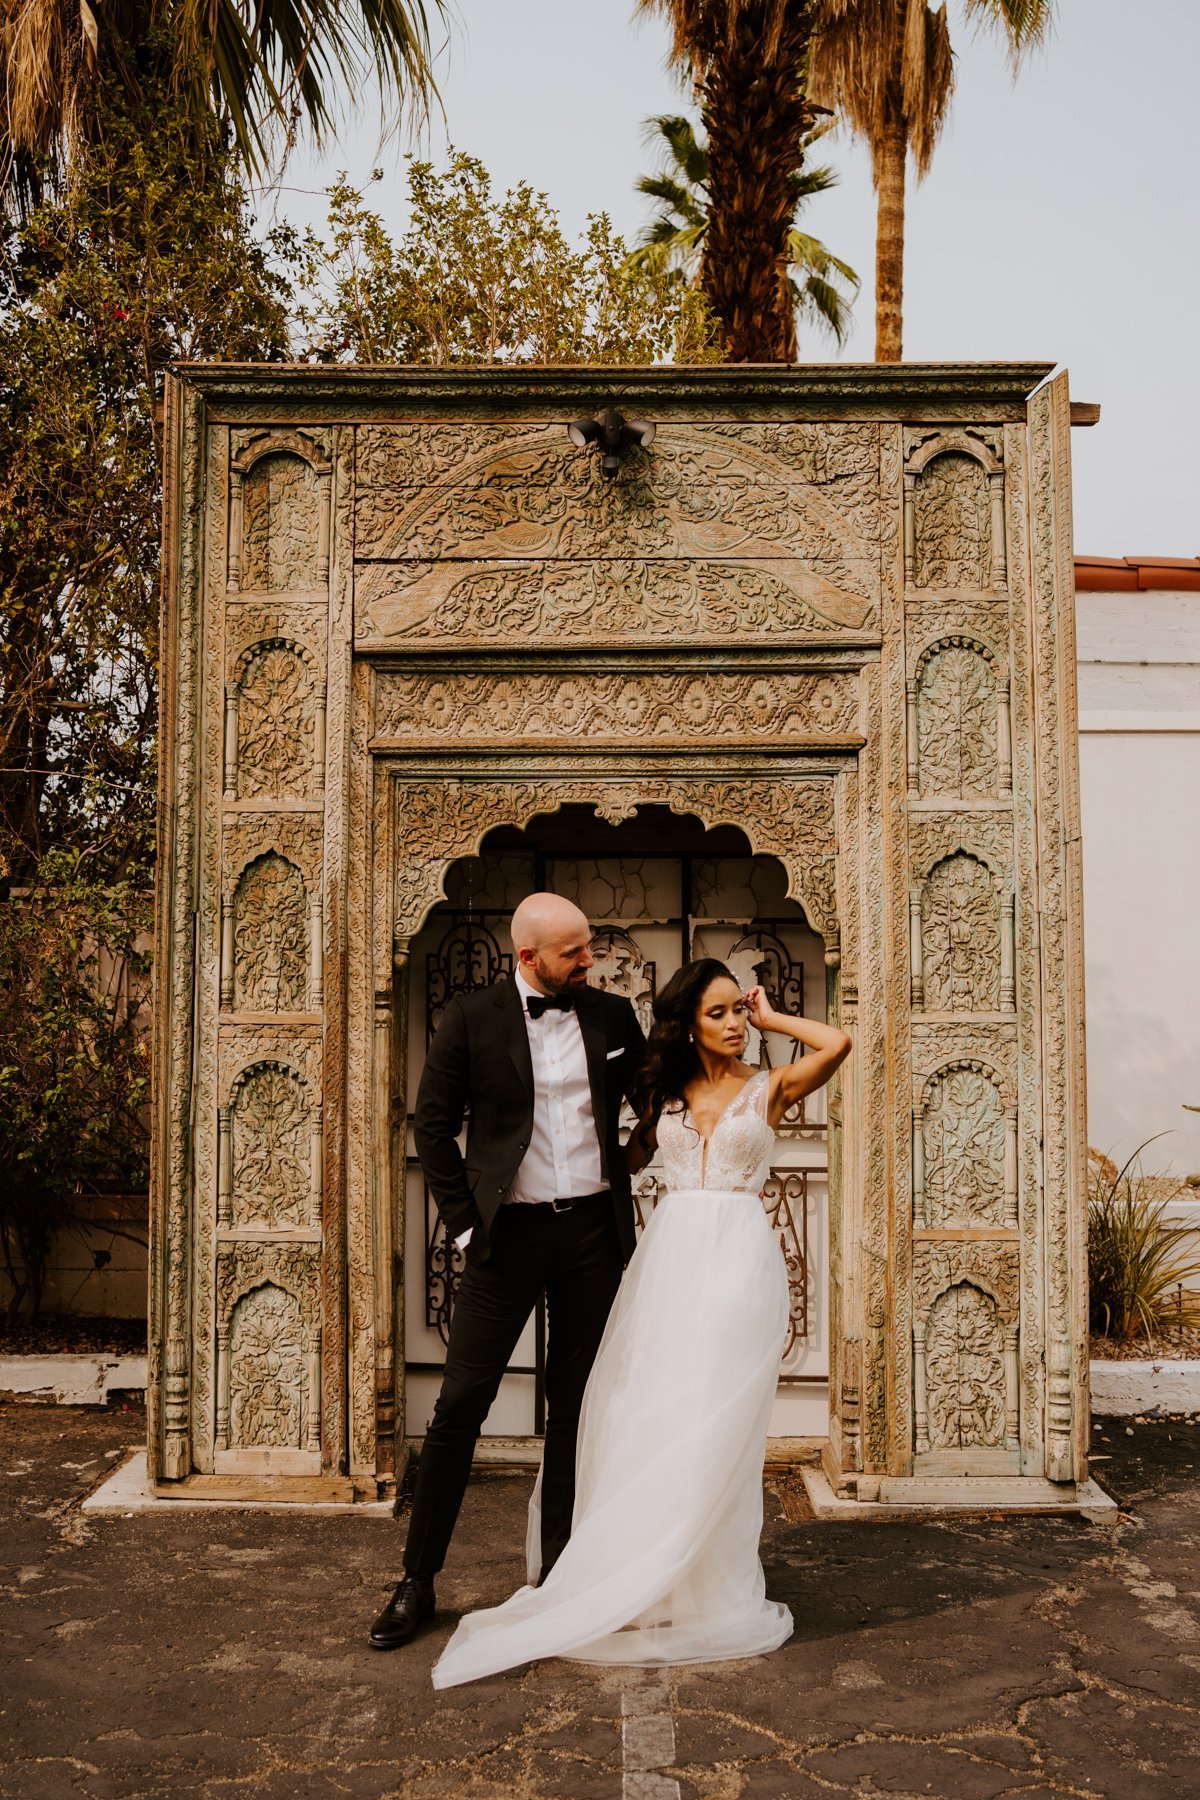 The Green Door Palm Springs, Bride and groom, Palm Springs Elopement, Photography by Tida Svy